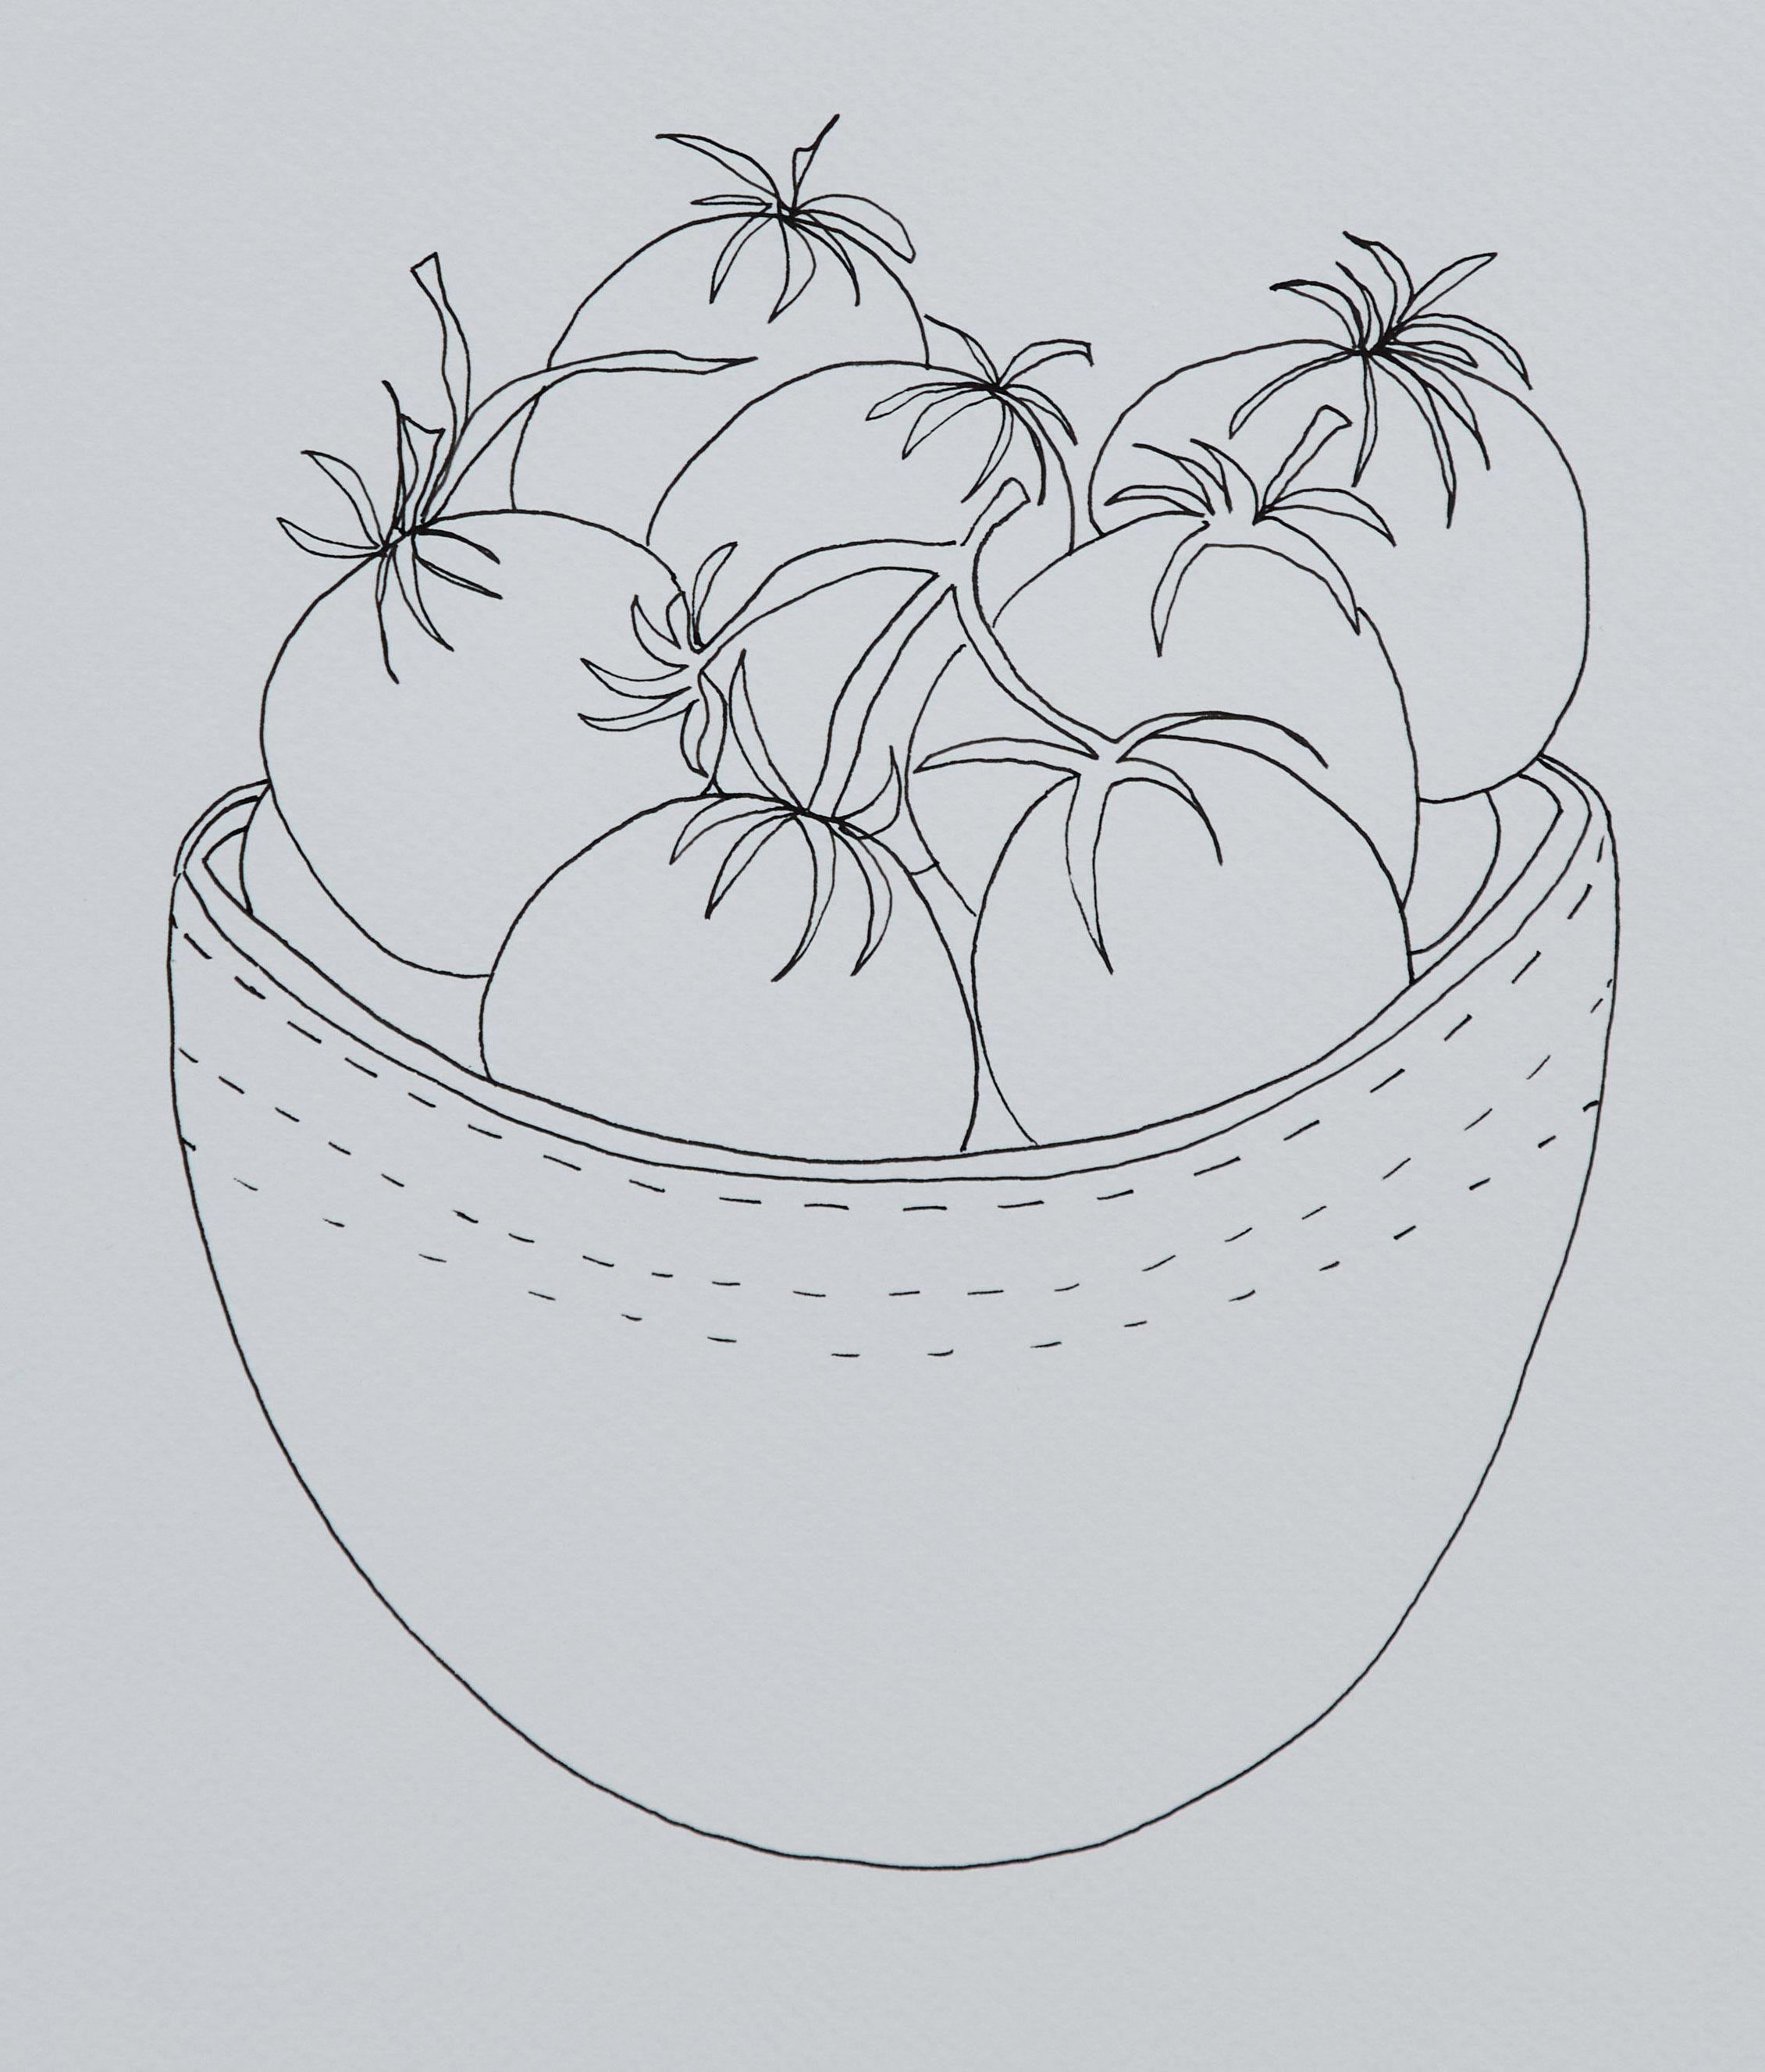 Liz Young, still life drawing of a bowl of citrus in a footed bowl, ink on paper

About the artist:
Liz Young is a botanical artist who lives in Los Angeles, California. Her ink on paper original drawings study flora, fruit, arrangements and